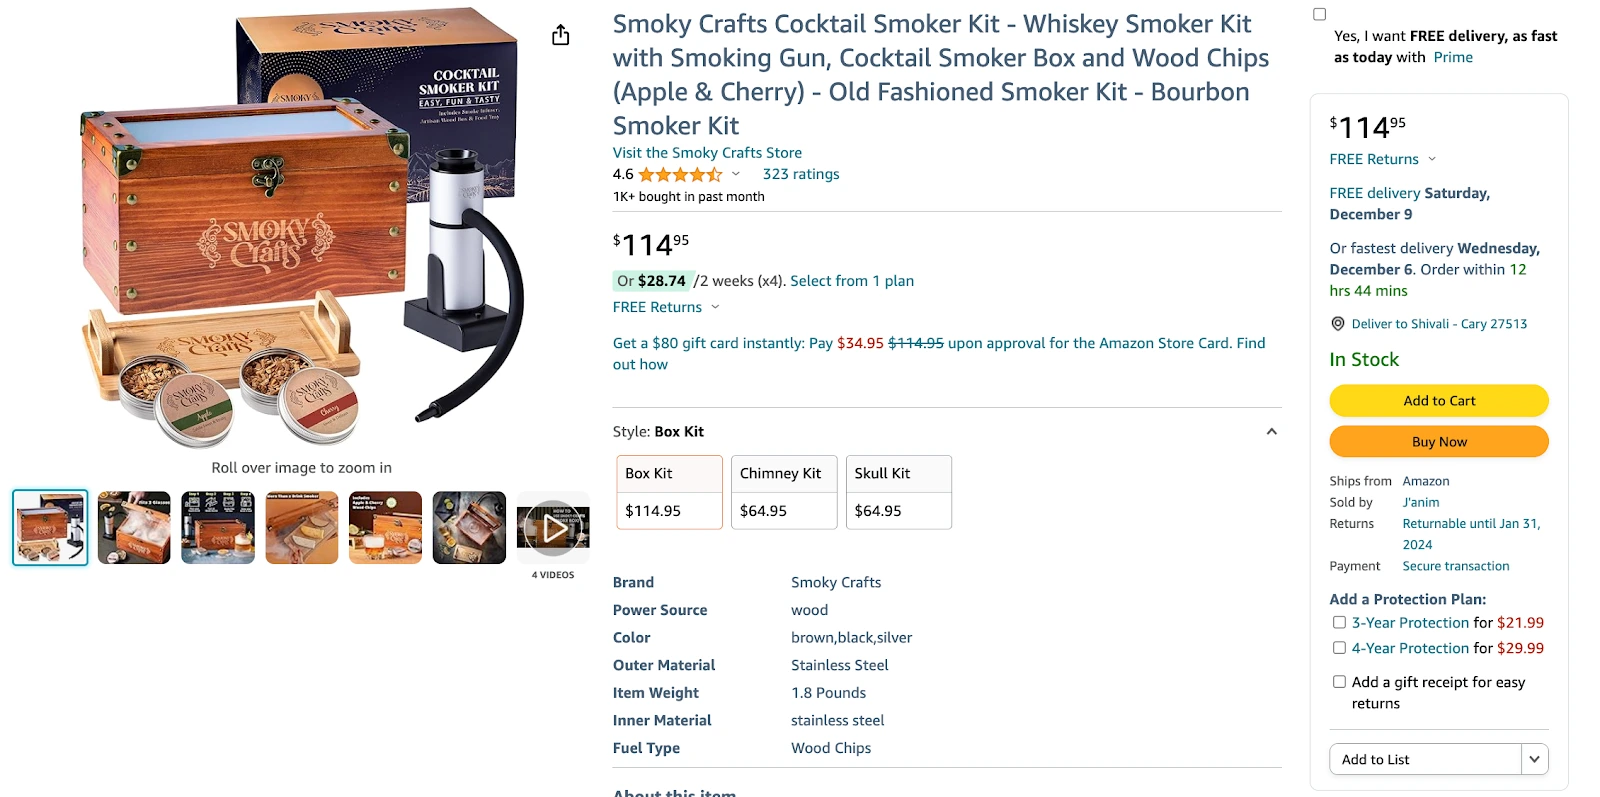 amazon-product-launch-strategies-smoky-crafts-listing